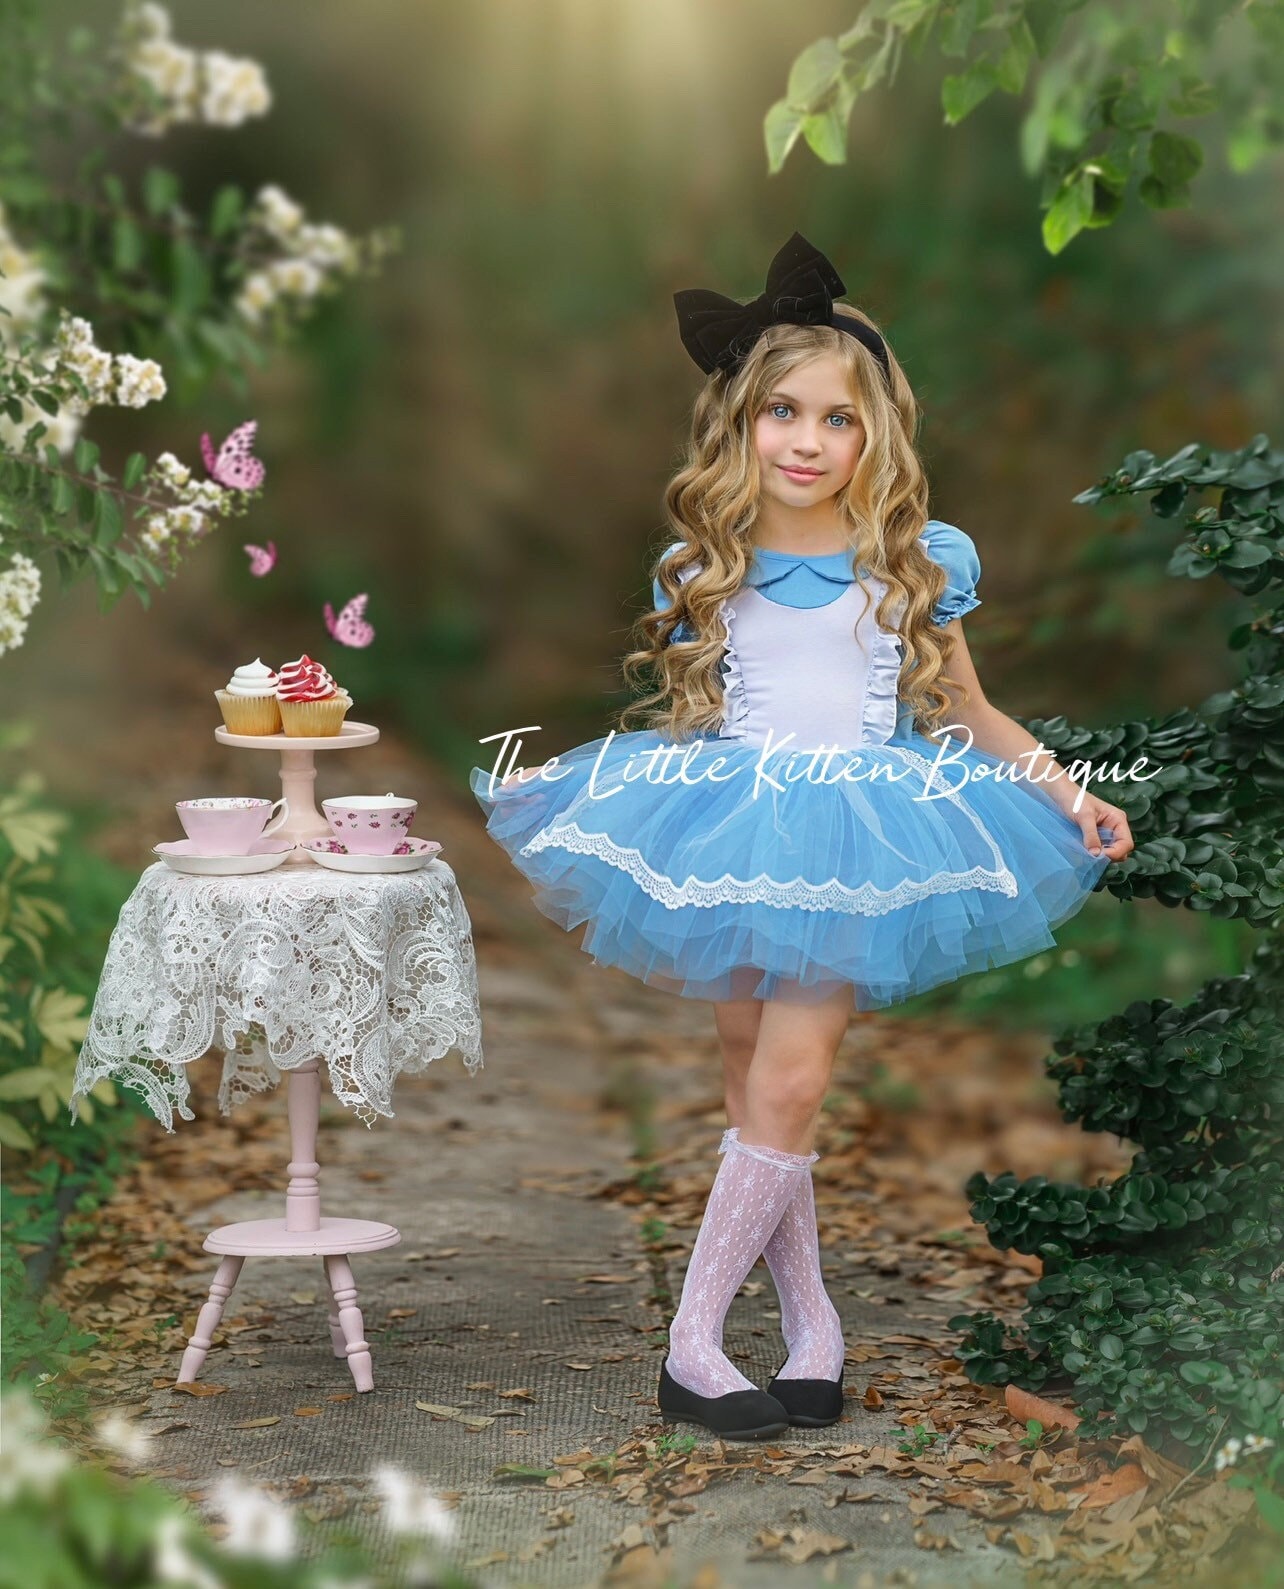 diane severin add images of alice in wonderland costumes photo